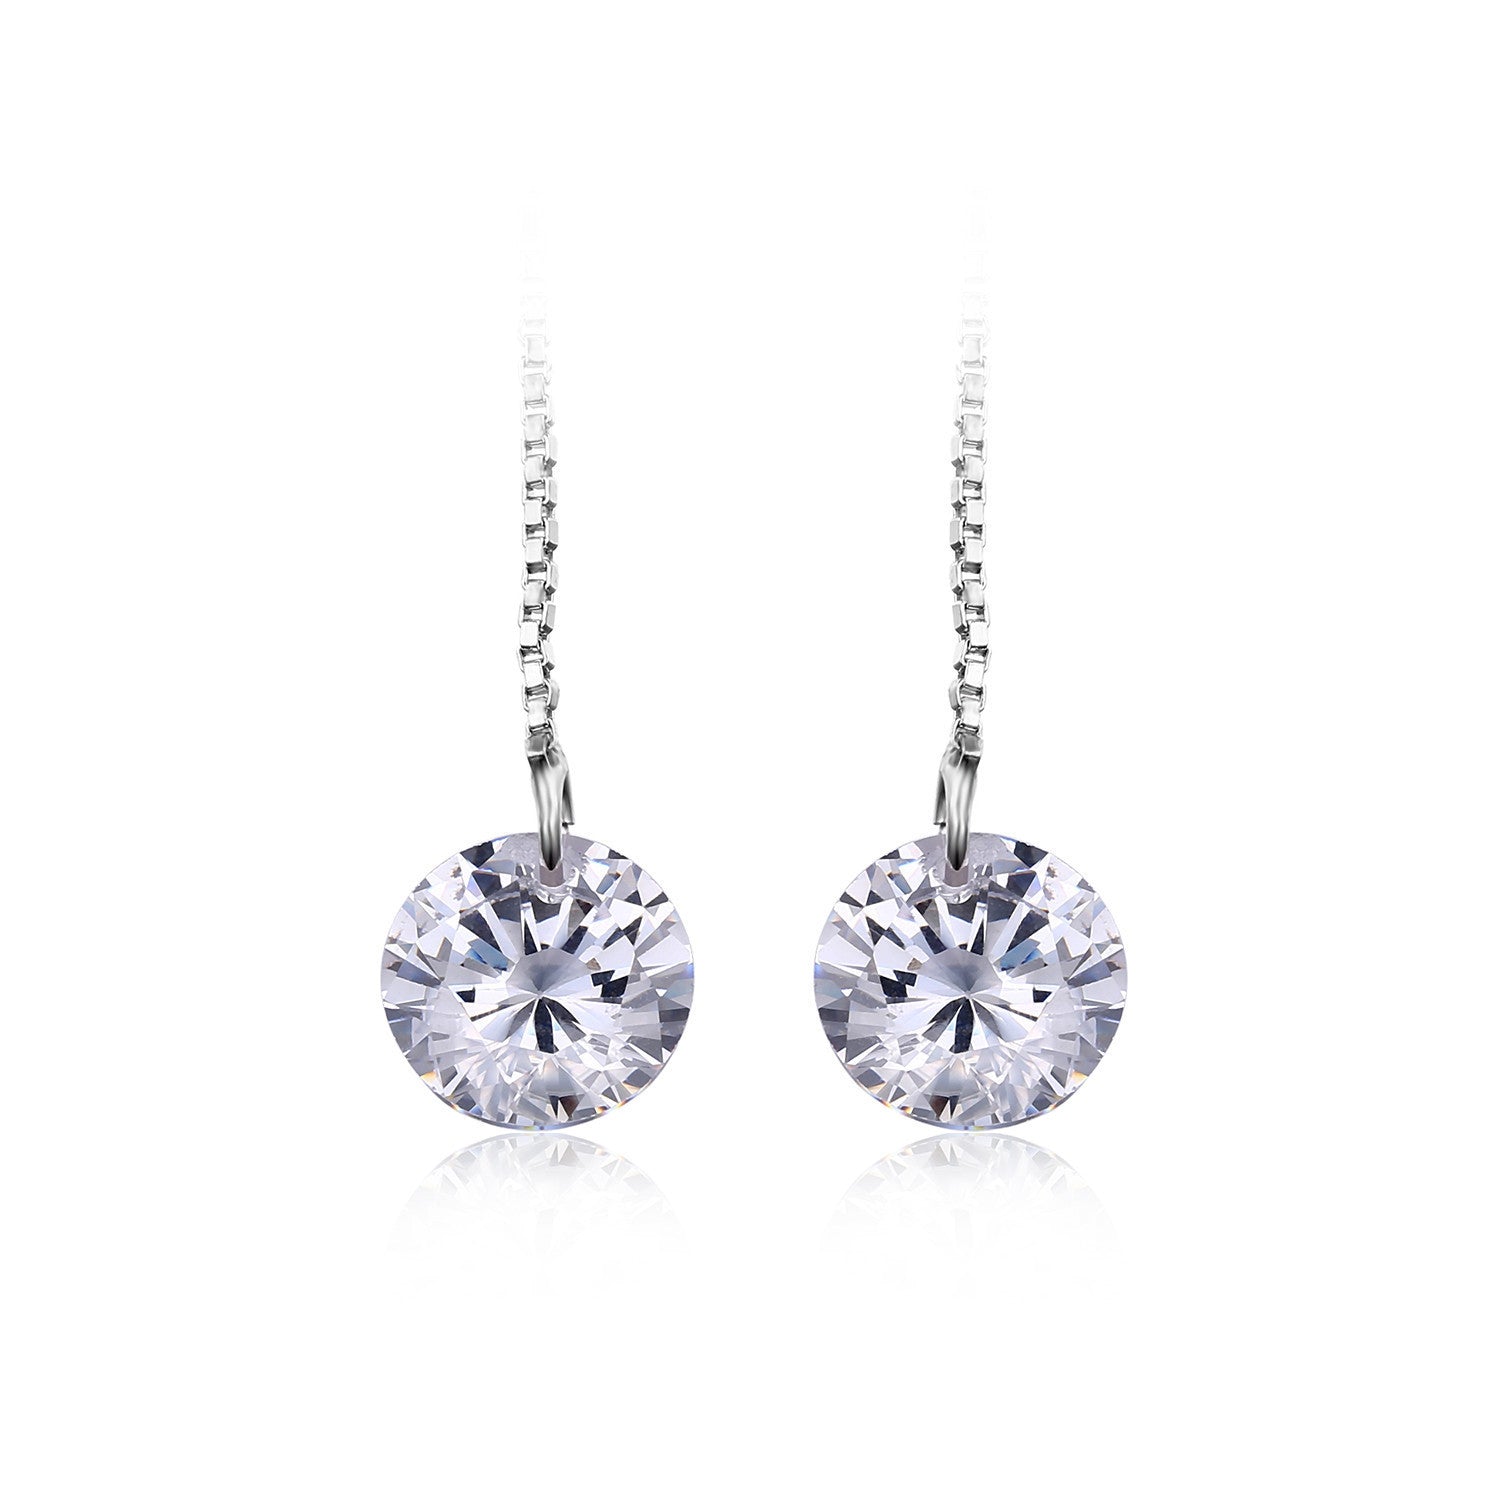 5.2ct Round Cut Earrings Real 925 Sterling Silver Fine Jewelry Fashion Long Earrings for Wedding Engagement Gift - CelebritystyleFashion.com.au online clothing shop australia